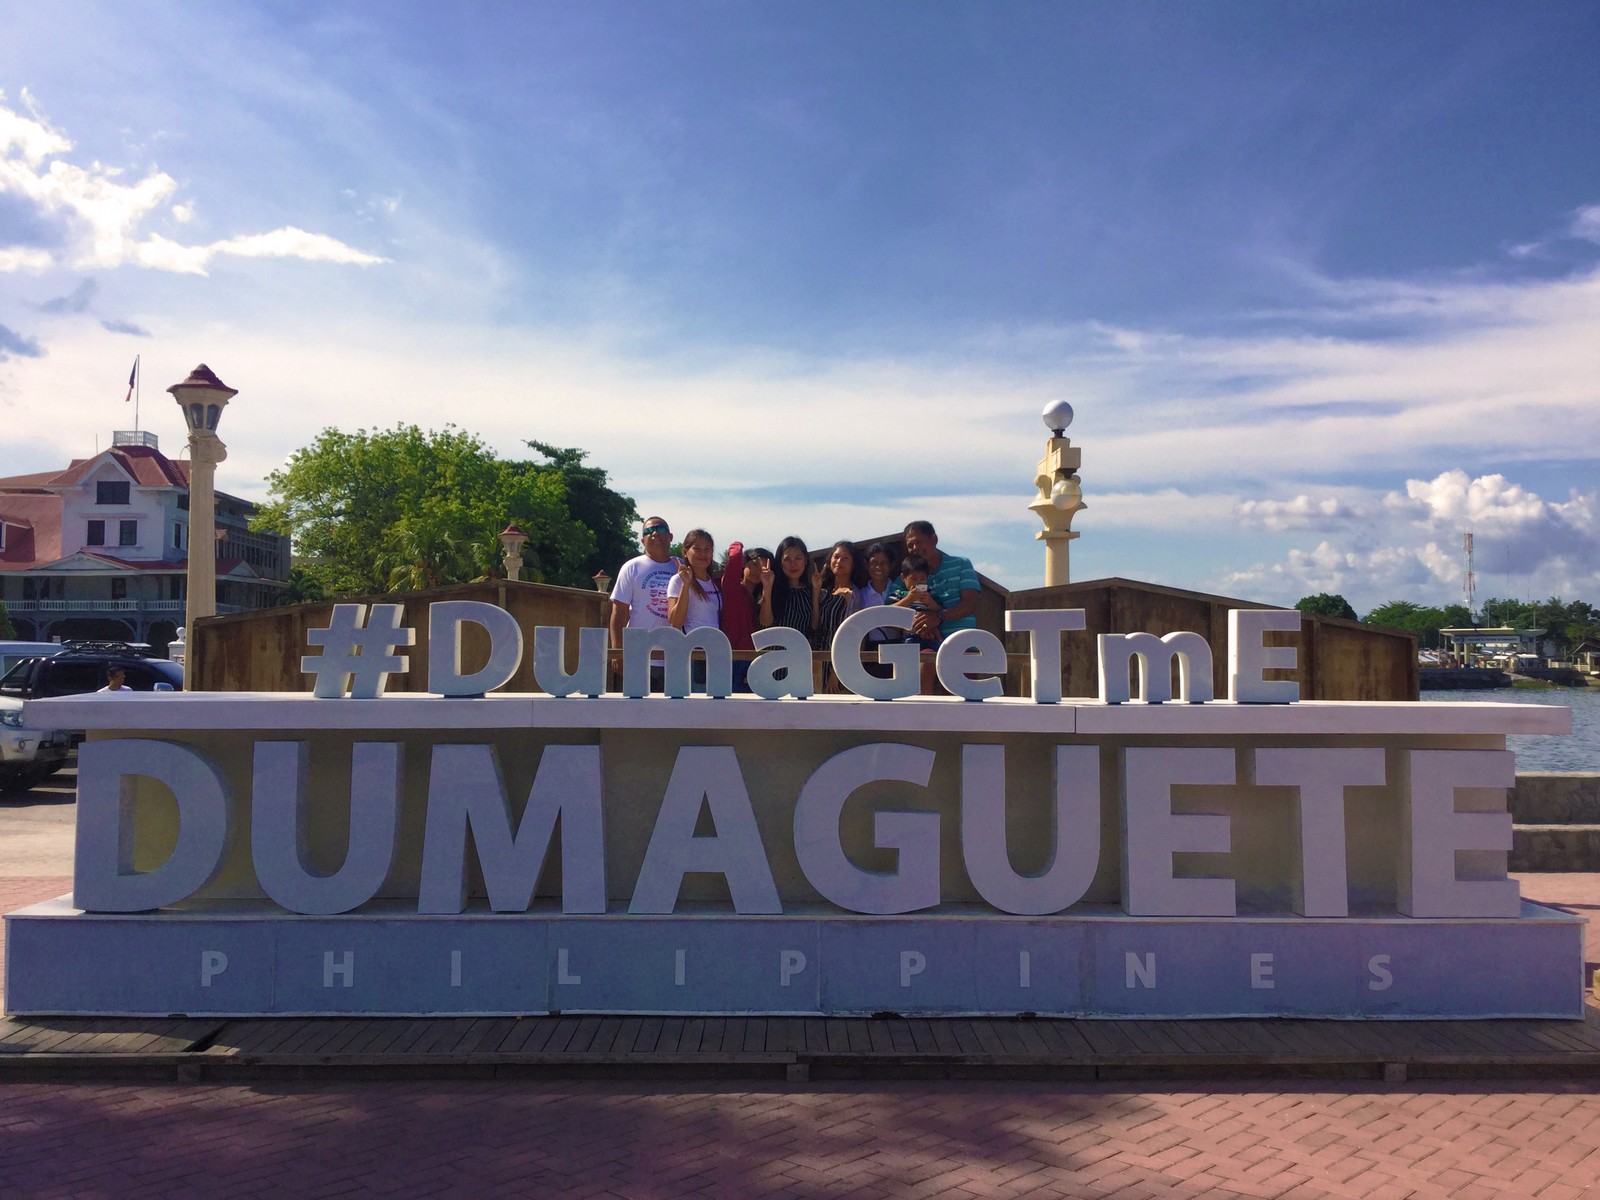 Book this Dumaguete City day tour today!